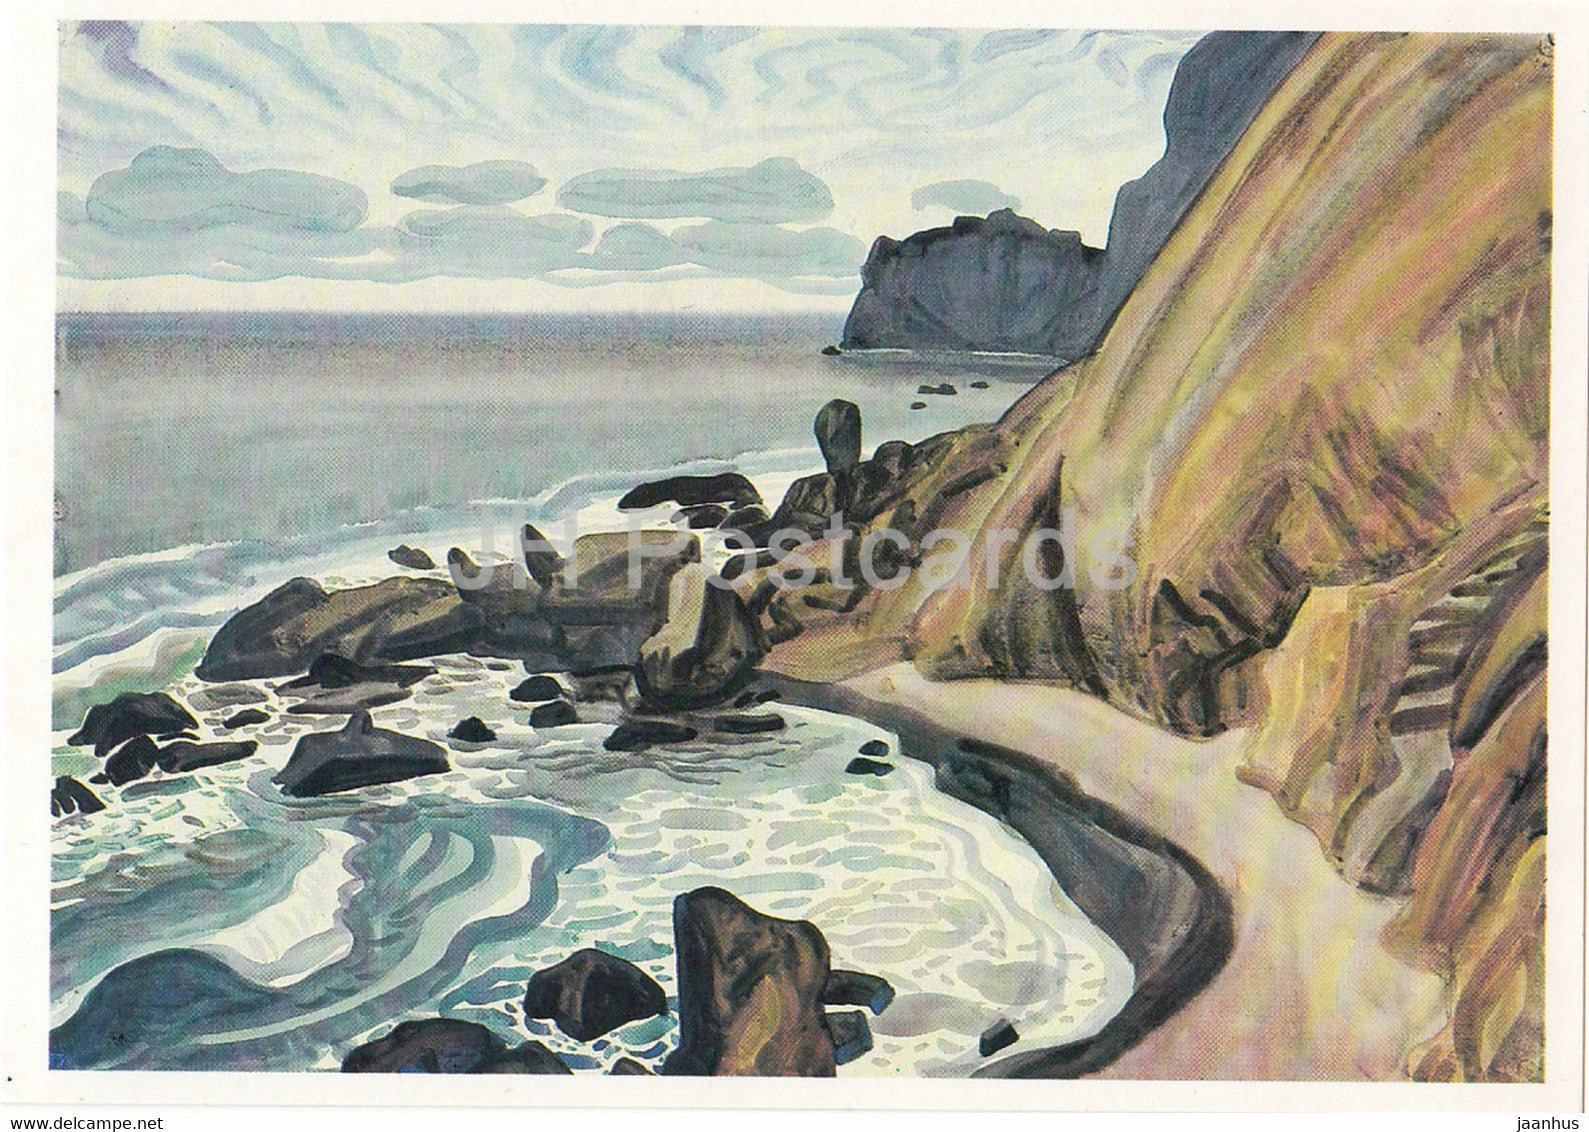 painting by G. Efimochkin - Koktebel - Priboy - Russian art - 1989 - Russia USSR - unused - JH Postcards